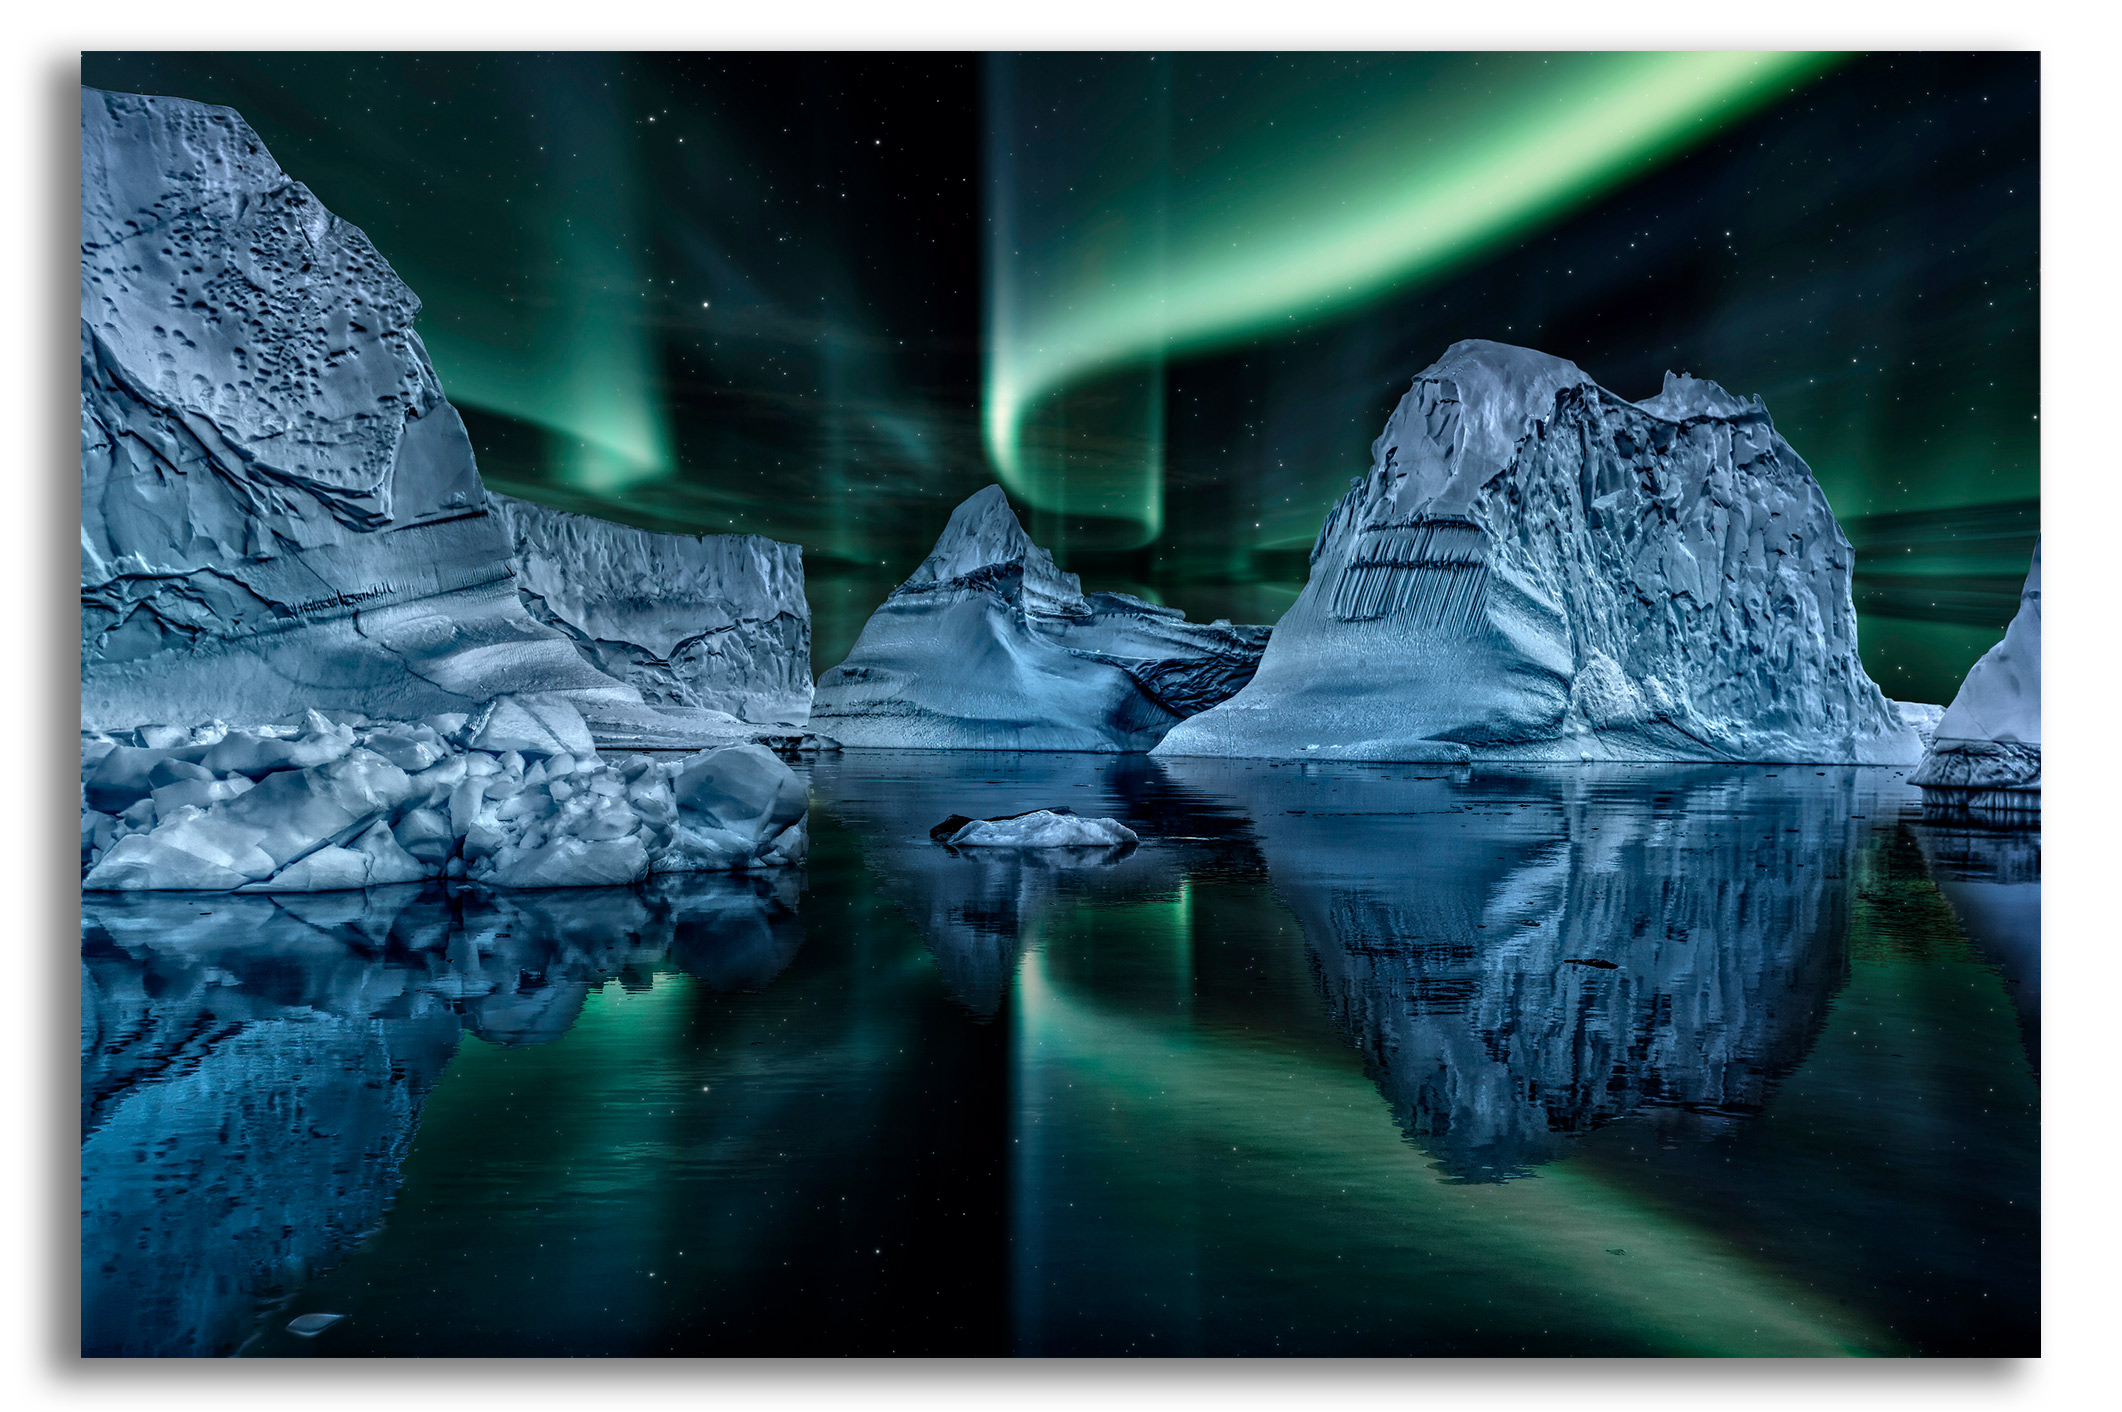 Iceberg floating in greenland fjord at night with green northern lights stock photo